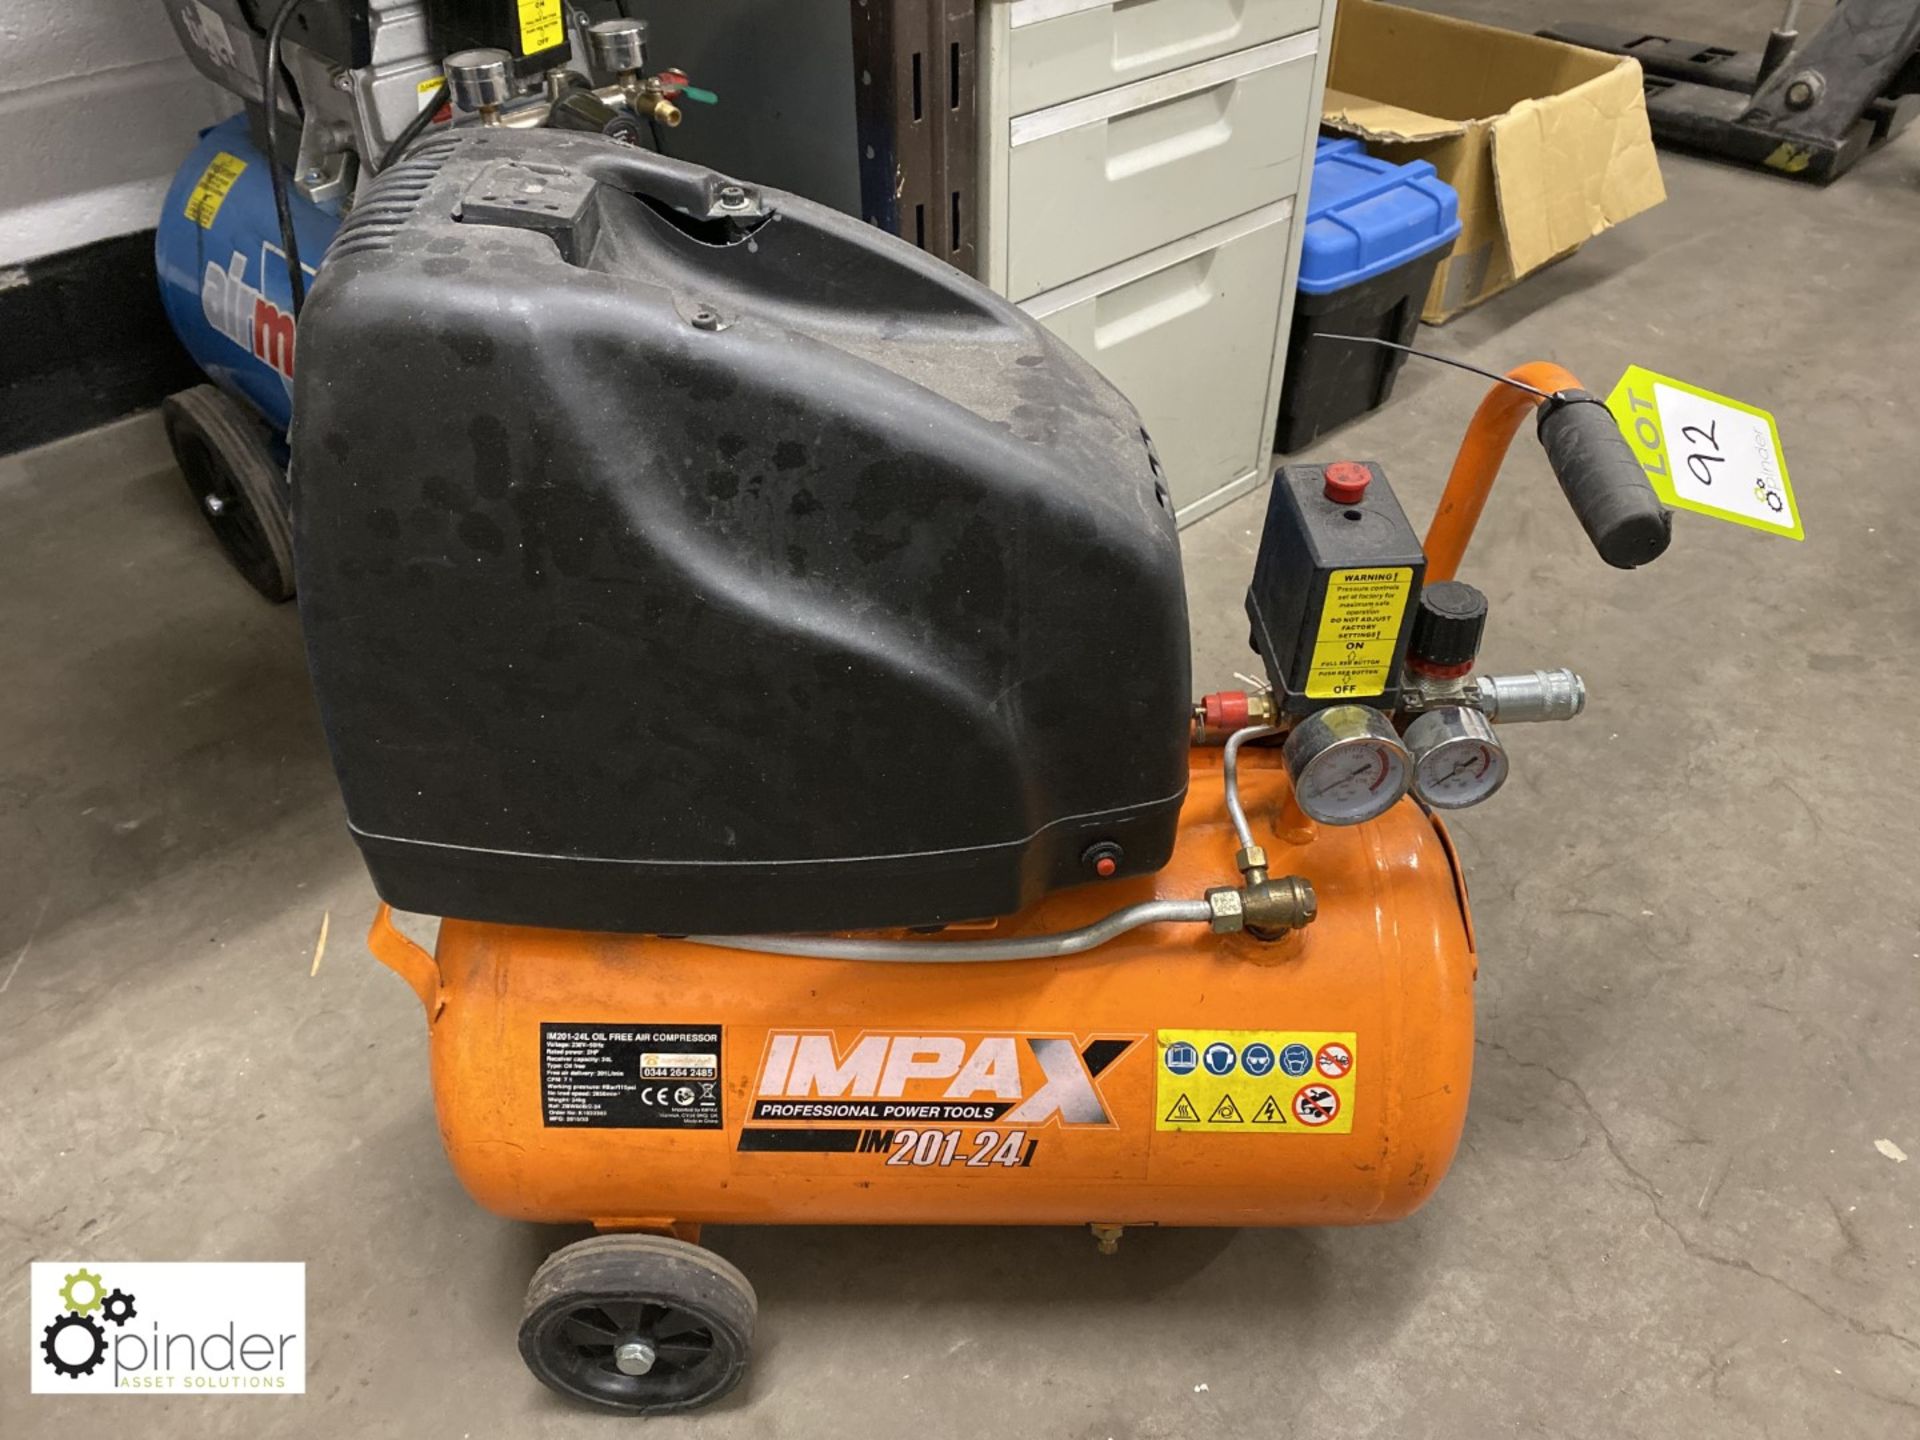 Impax IM201/24 portable receiver mounted Compressor, 240volts (this lot is located in Penistone)